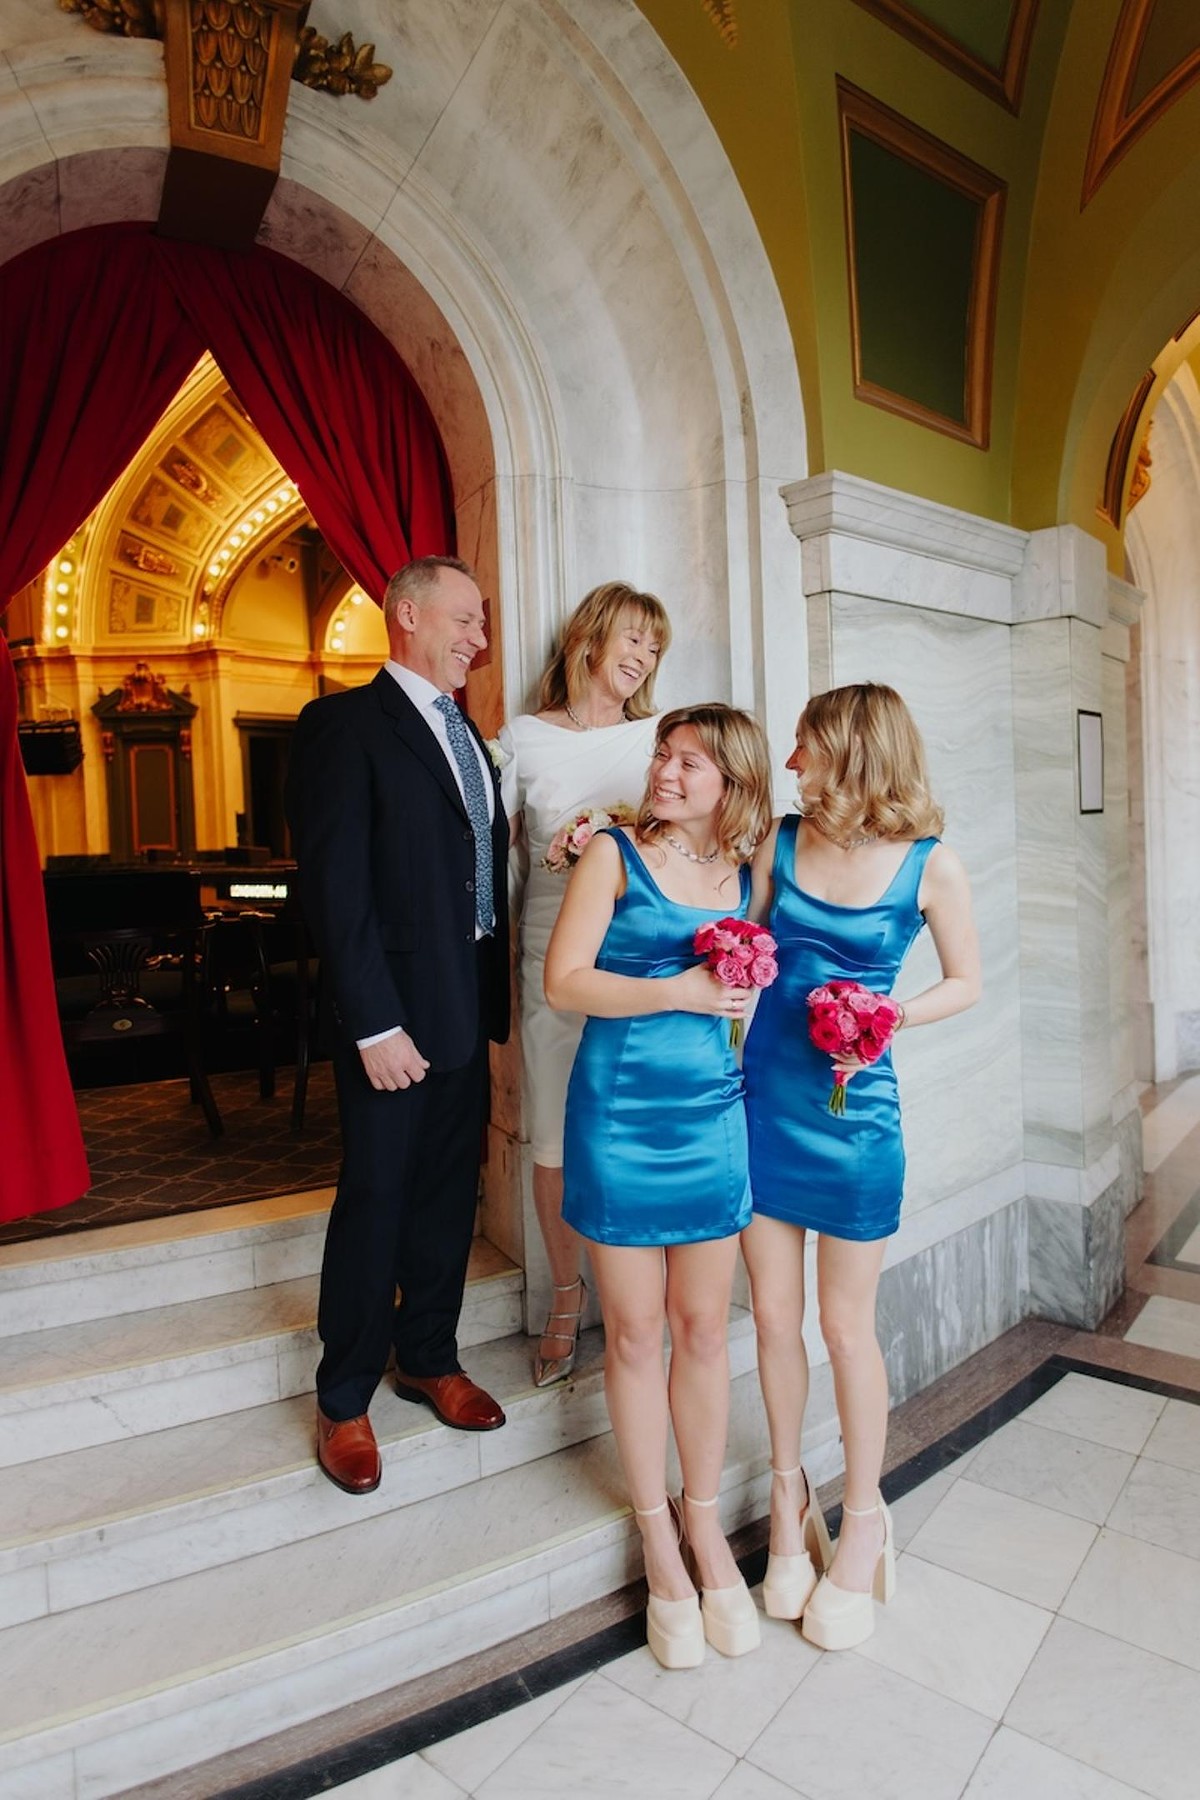 Scott Gaede and Julie Shore with their daughters Rachel and Caroline at their second wedding on Dec. 28.